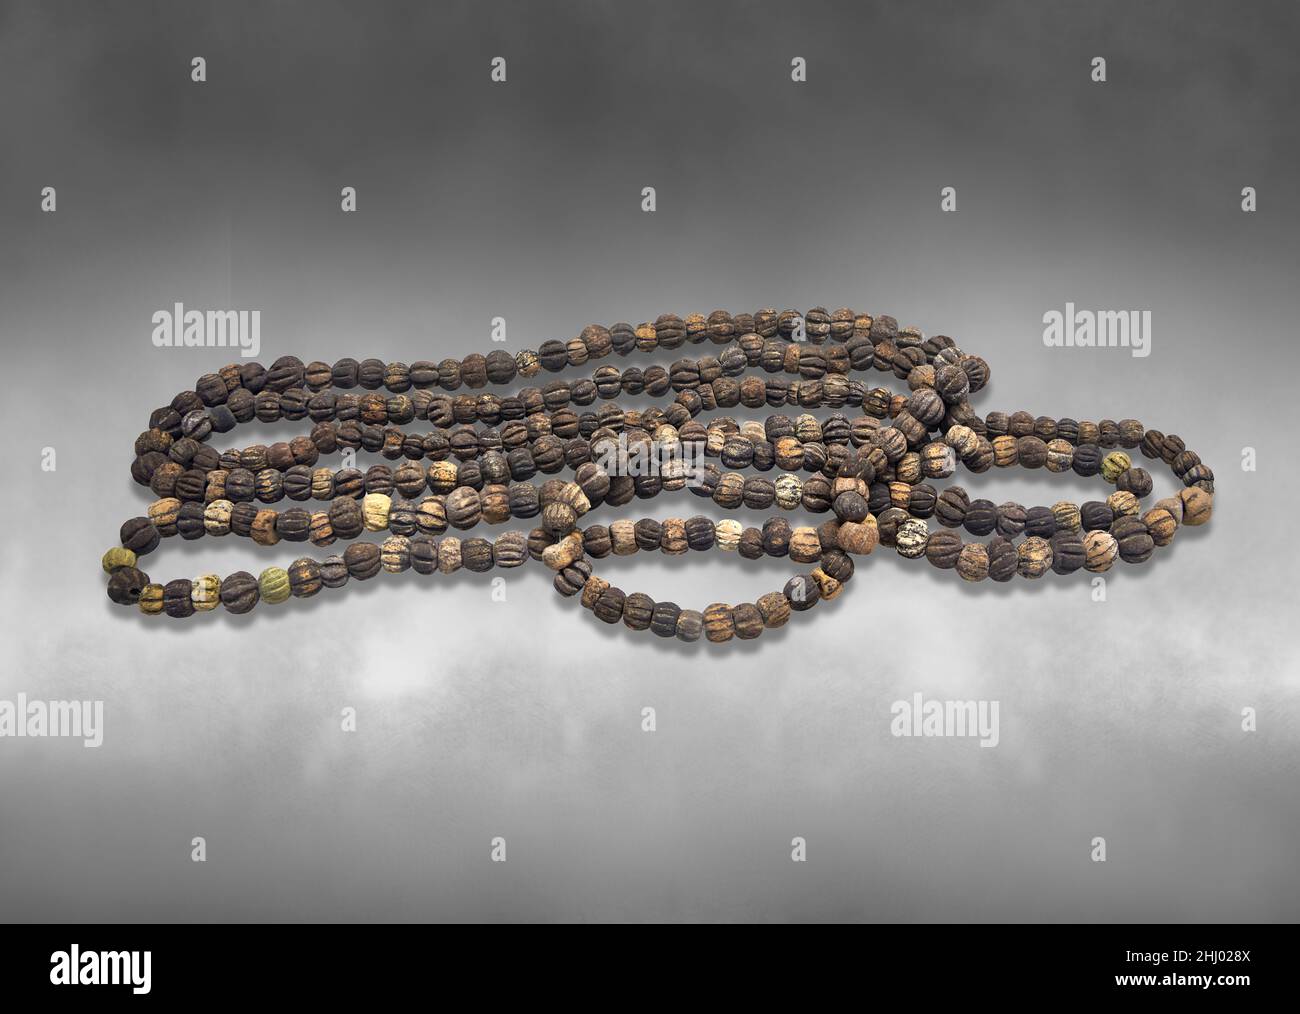 Mycenaean jewellery - glass bead necklace, cemetery at Dendra, chamber tomb 10. Naflion Archaeo;ogical Museum. . Against grey background. Photographer Stock Photo